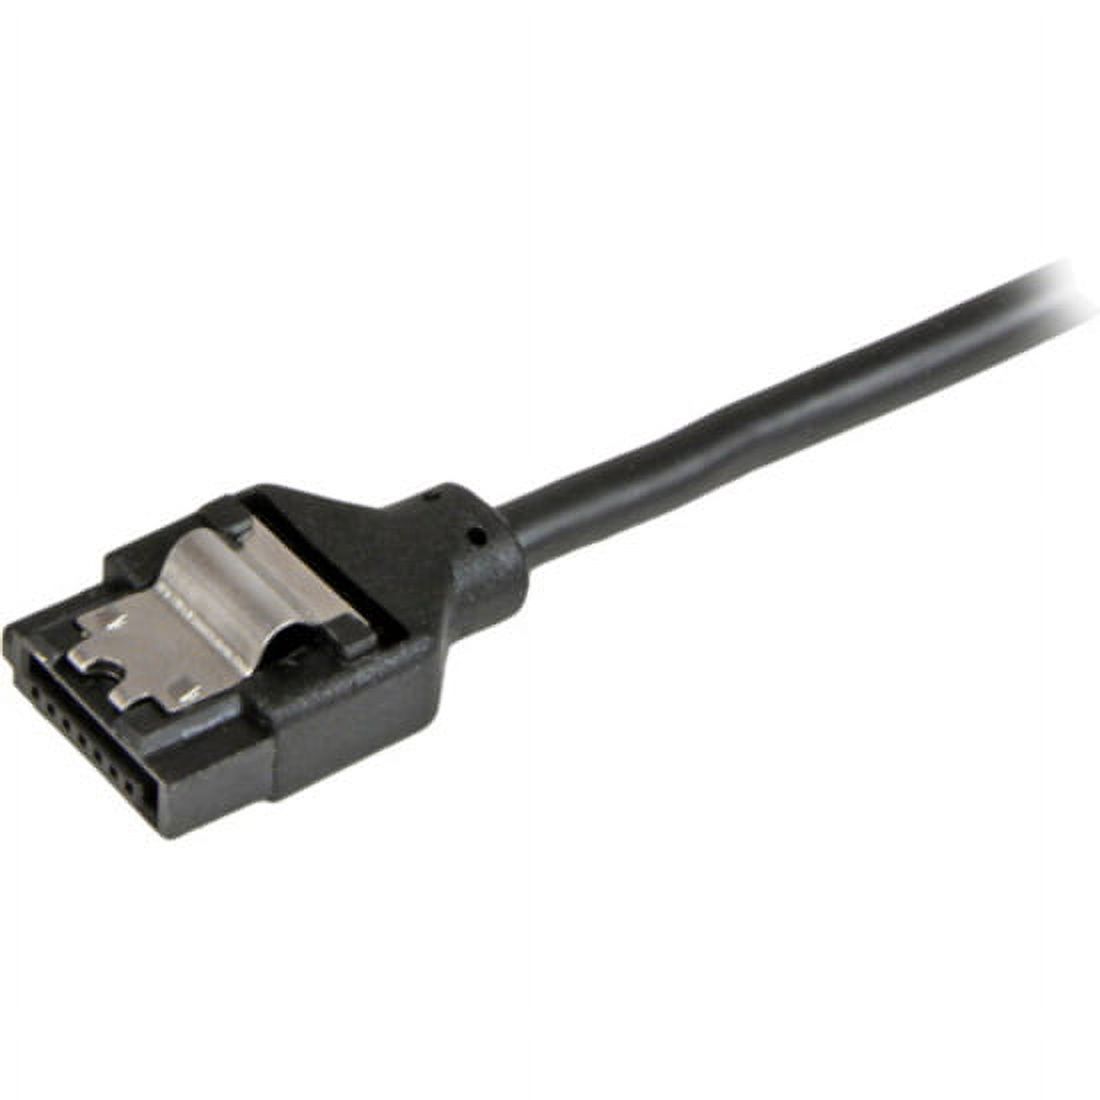 STARTECH.COM LSATARND12R1 12IN LATCHING ROUND SATA CABLE - image 3 of 3